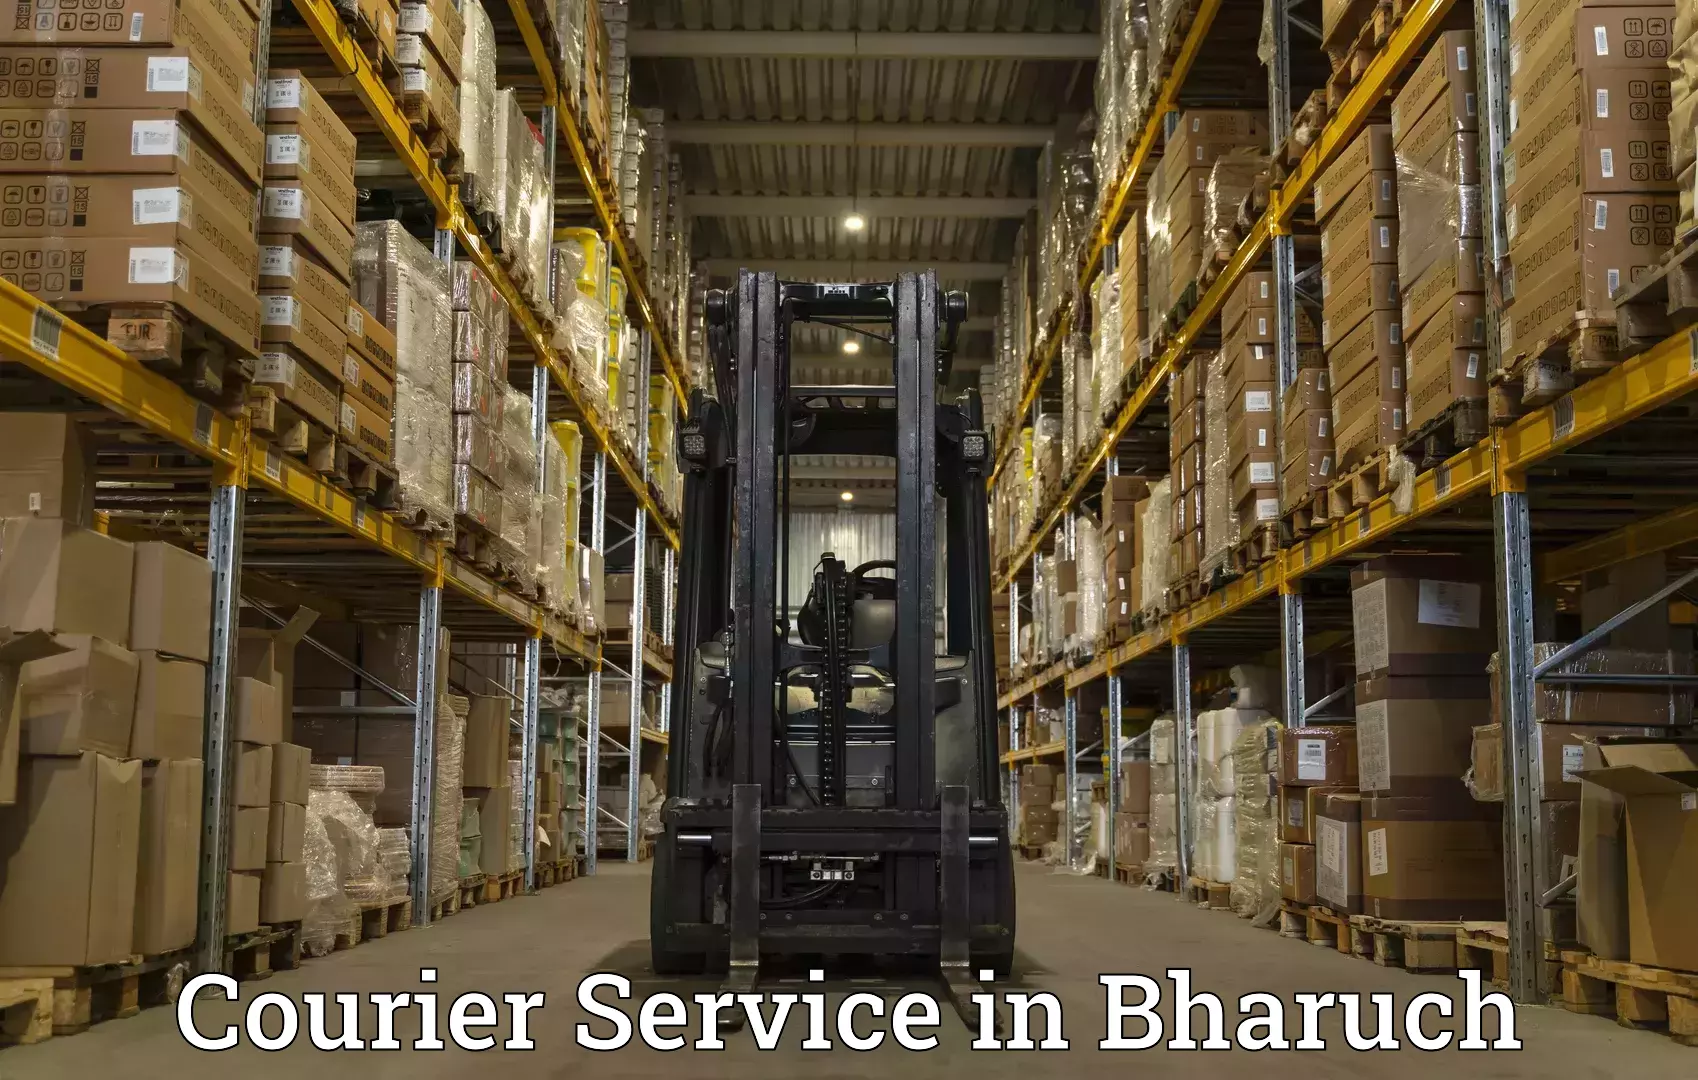 Multi-package shipping in Bharuch